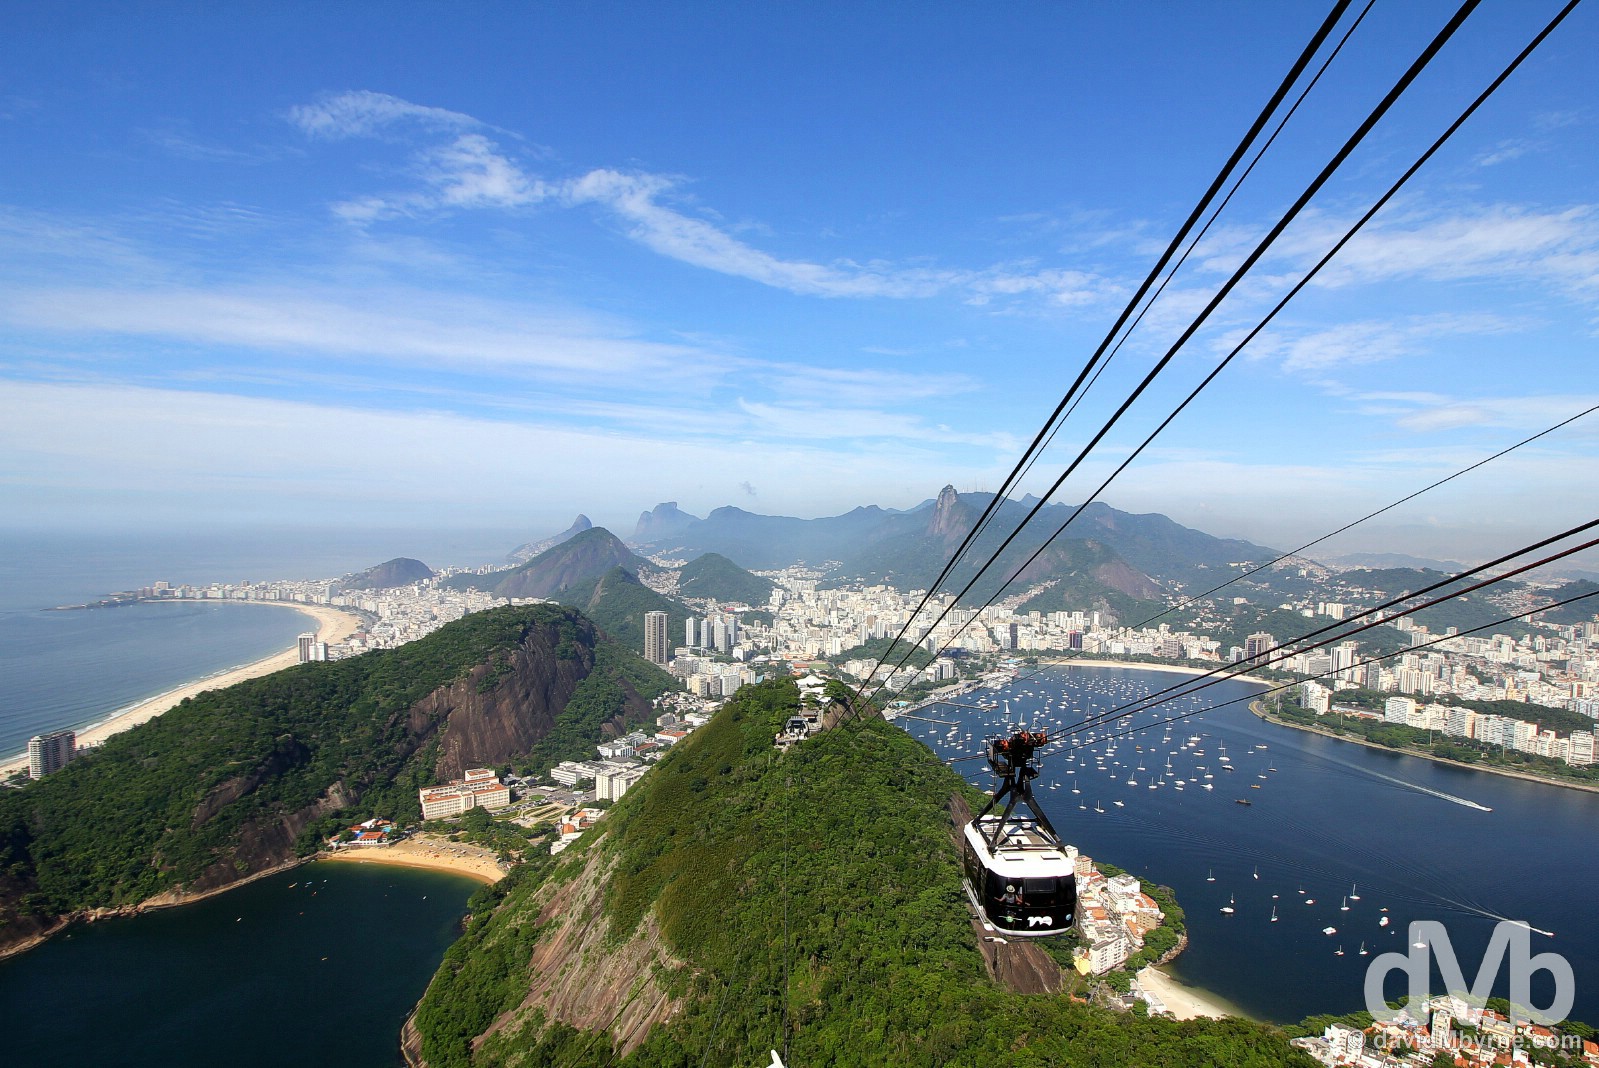 The stunning city of Rio de Janeiro, Brazil, as seen from the city's Sugarloaf Mountain. December 12, 2015. 